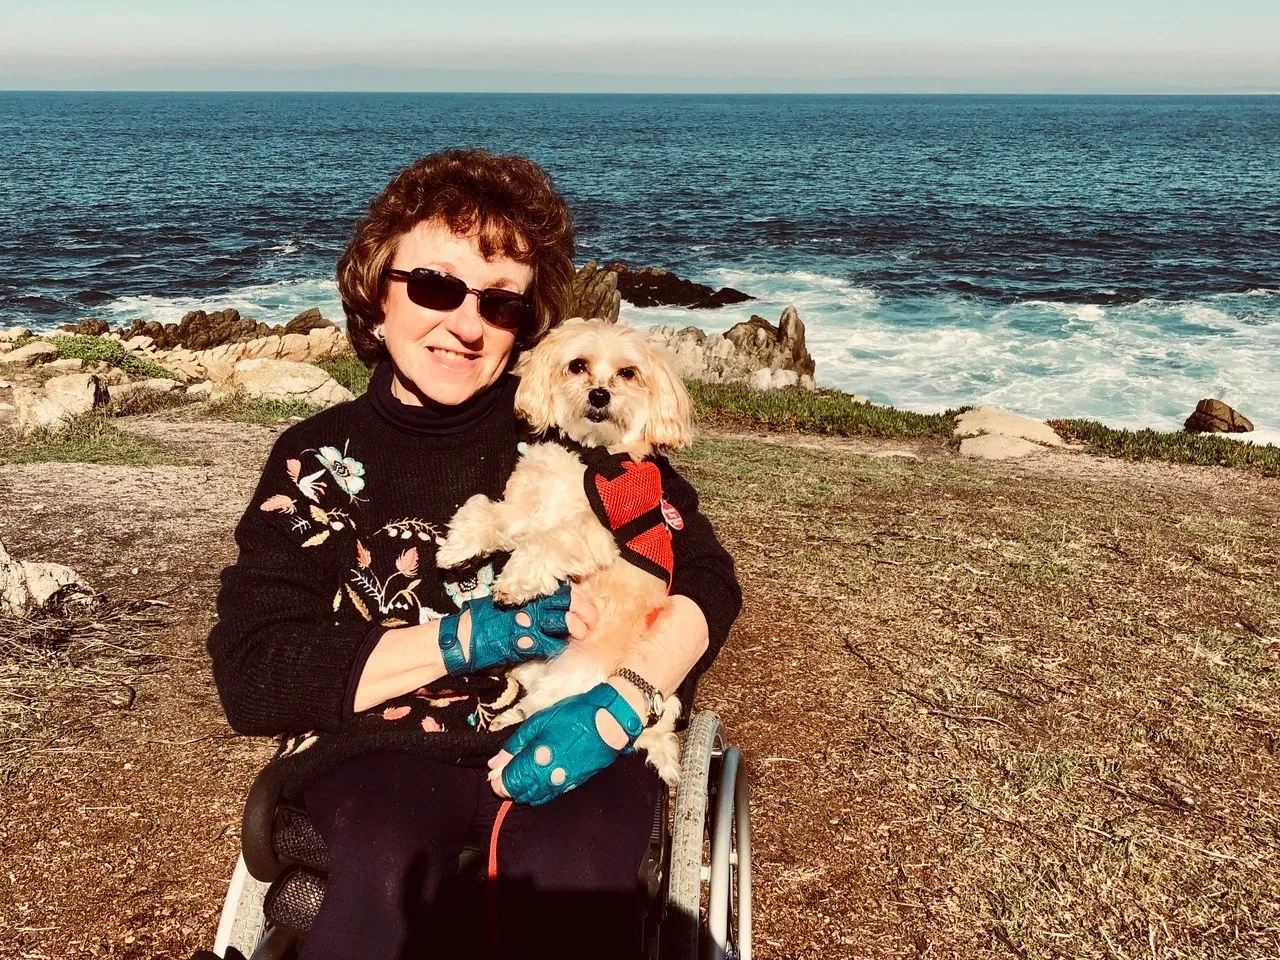 A woman sitting in a wheel chair and holding a puppy